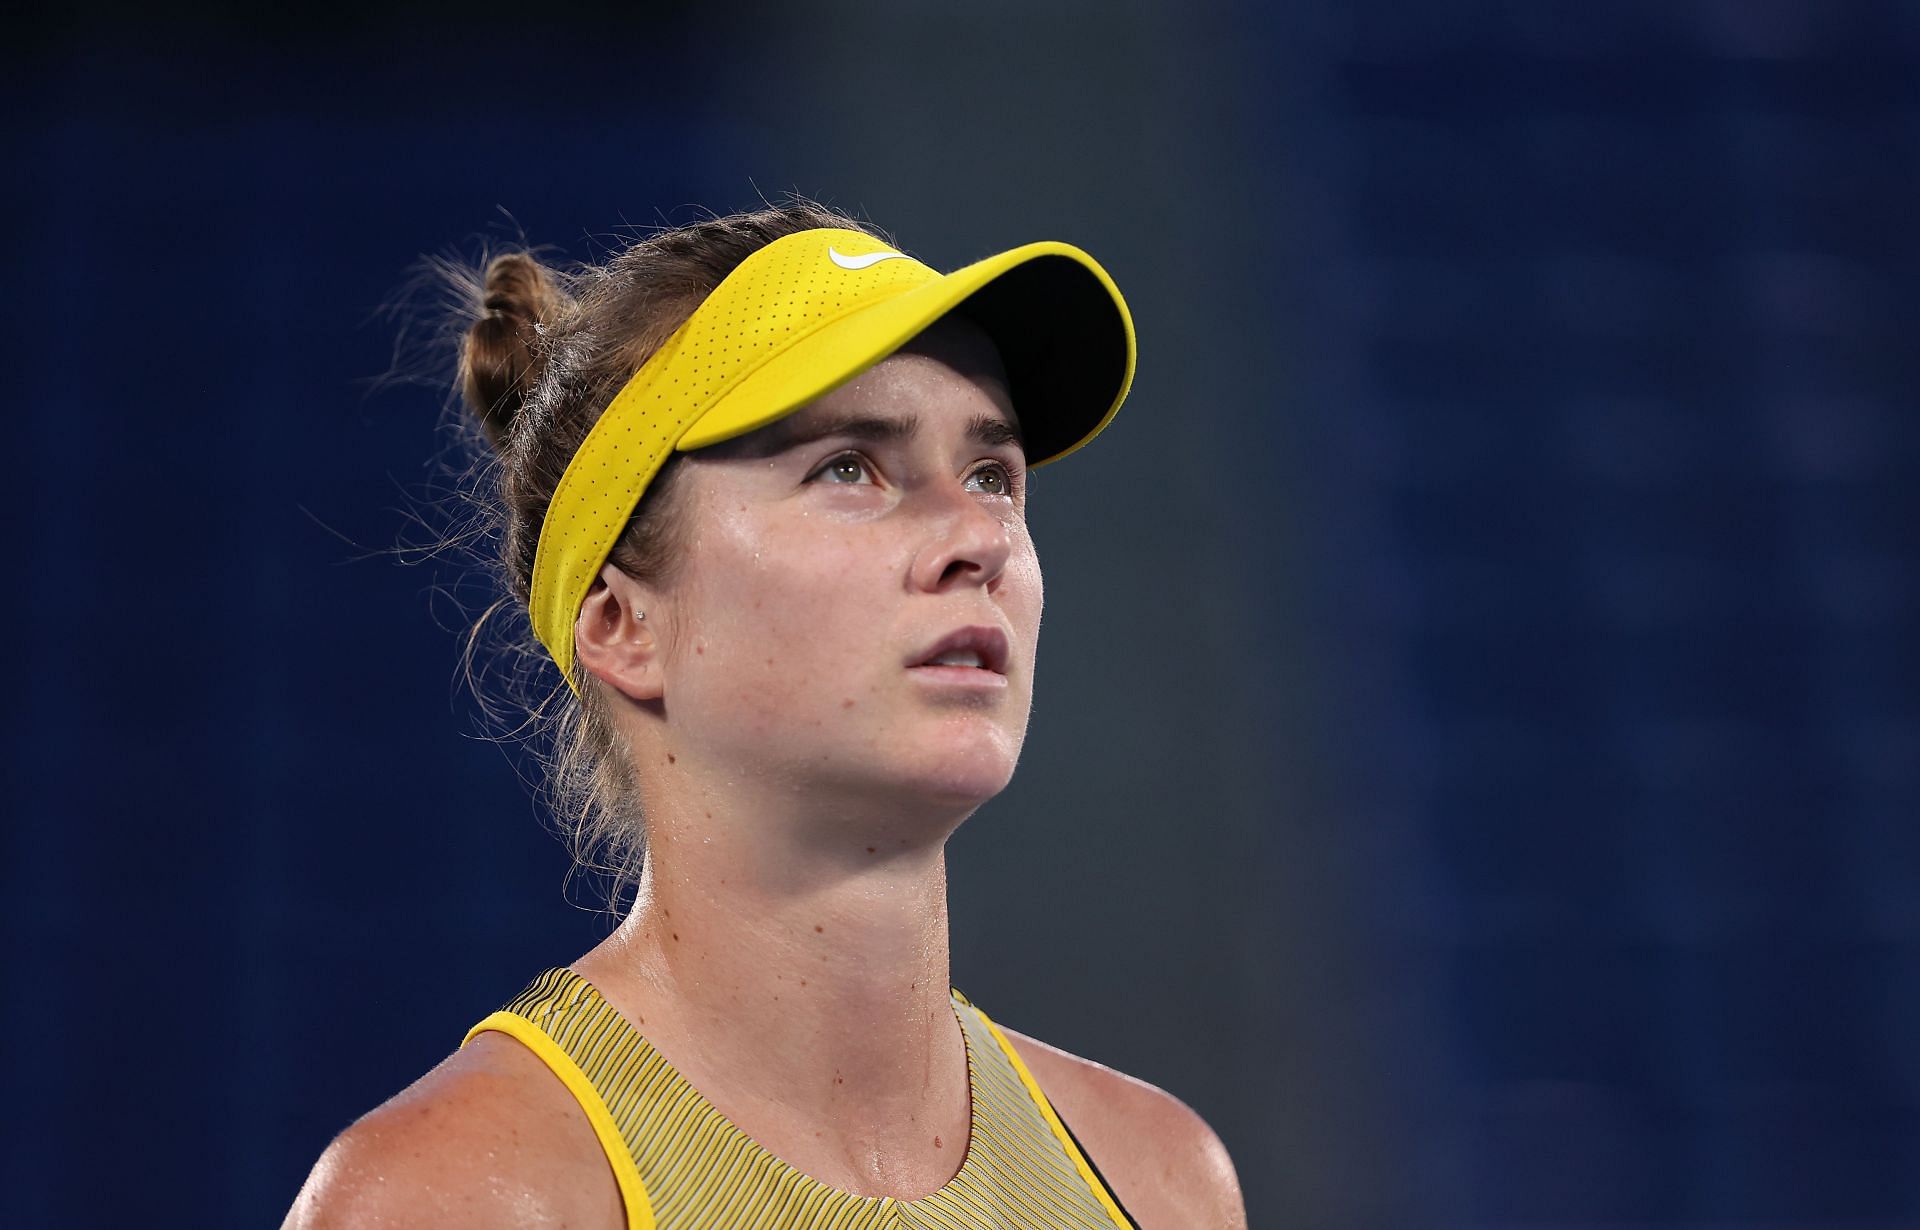 &quot;All the Ukrainians, we&rsquo;ve been having roundtables with the WTA, International Tennis Federation, Grand Slams, explaining the help we need, but they chose to go their separate ways&quot; - Elina Svitolina